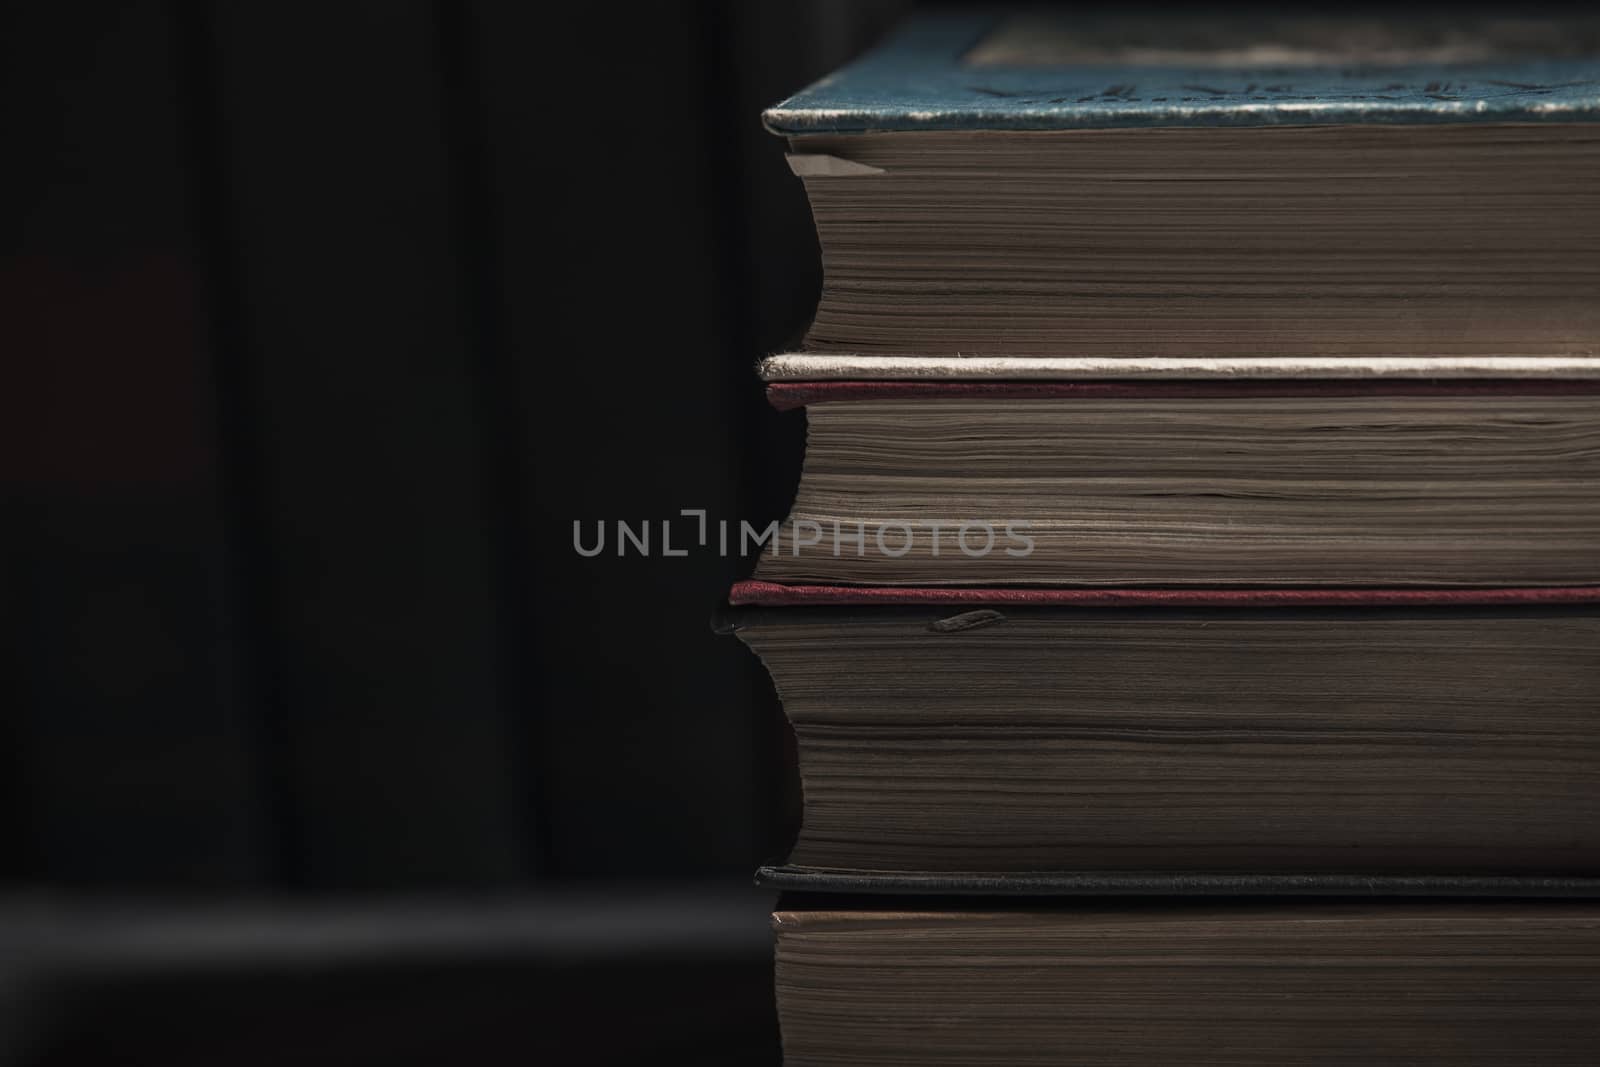 Pile of books by snep_photo